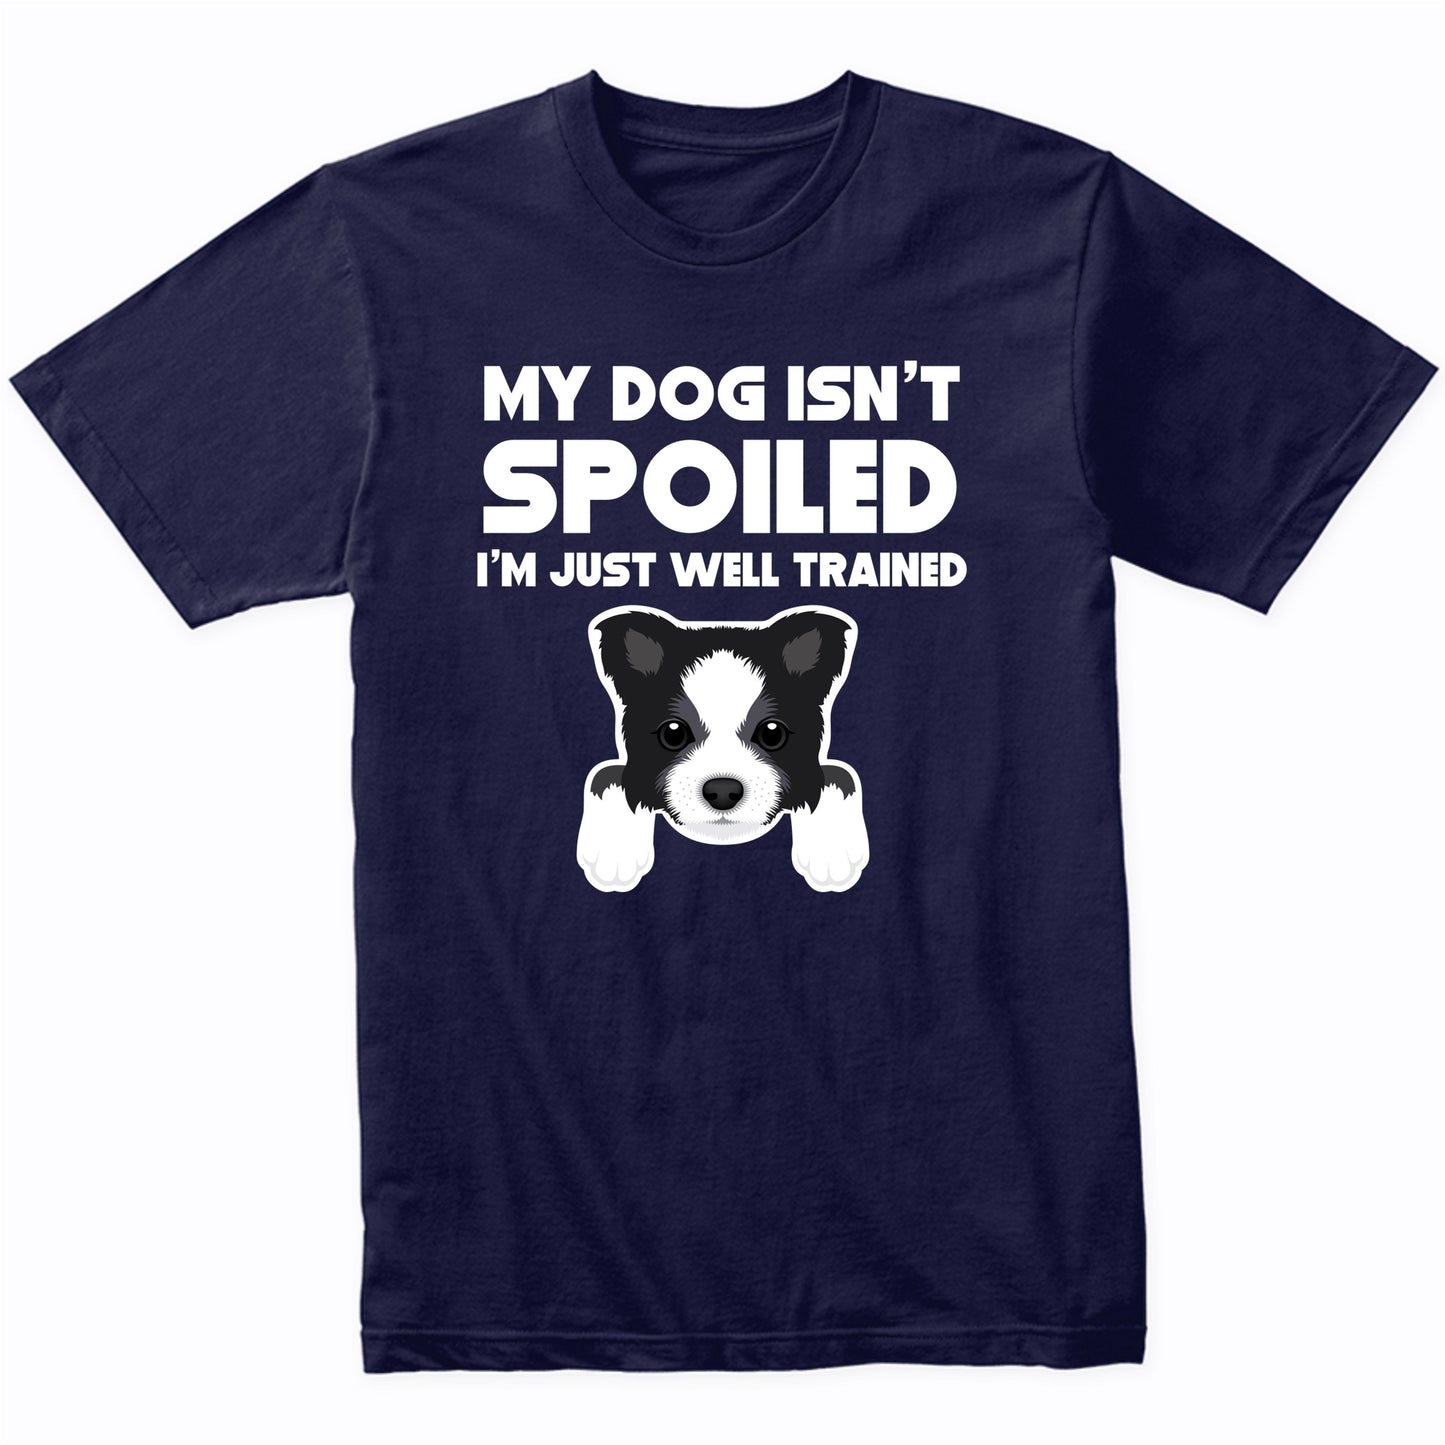 My Dog Isn't Spoiled I'm Just Well Trained Funny Border Collie T-Shirt